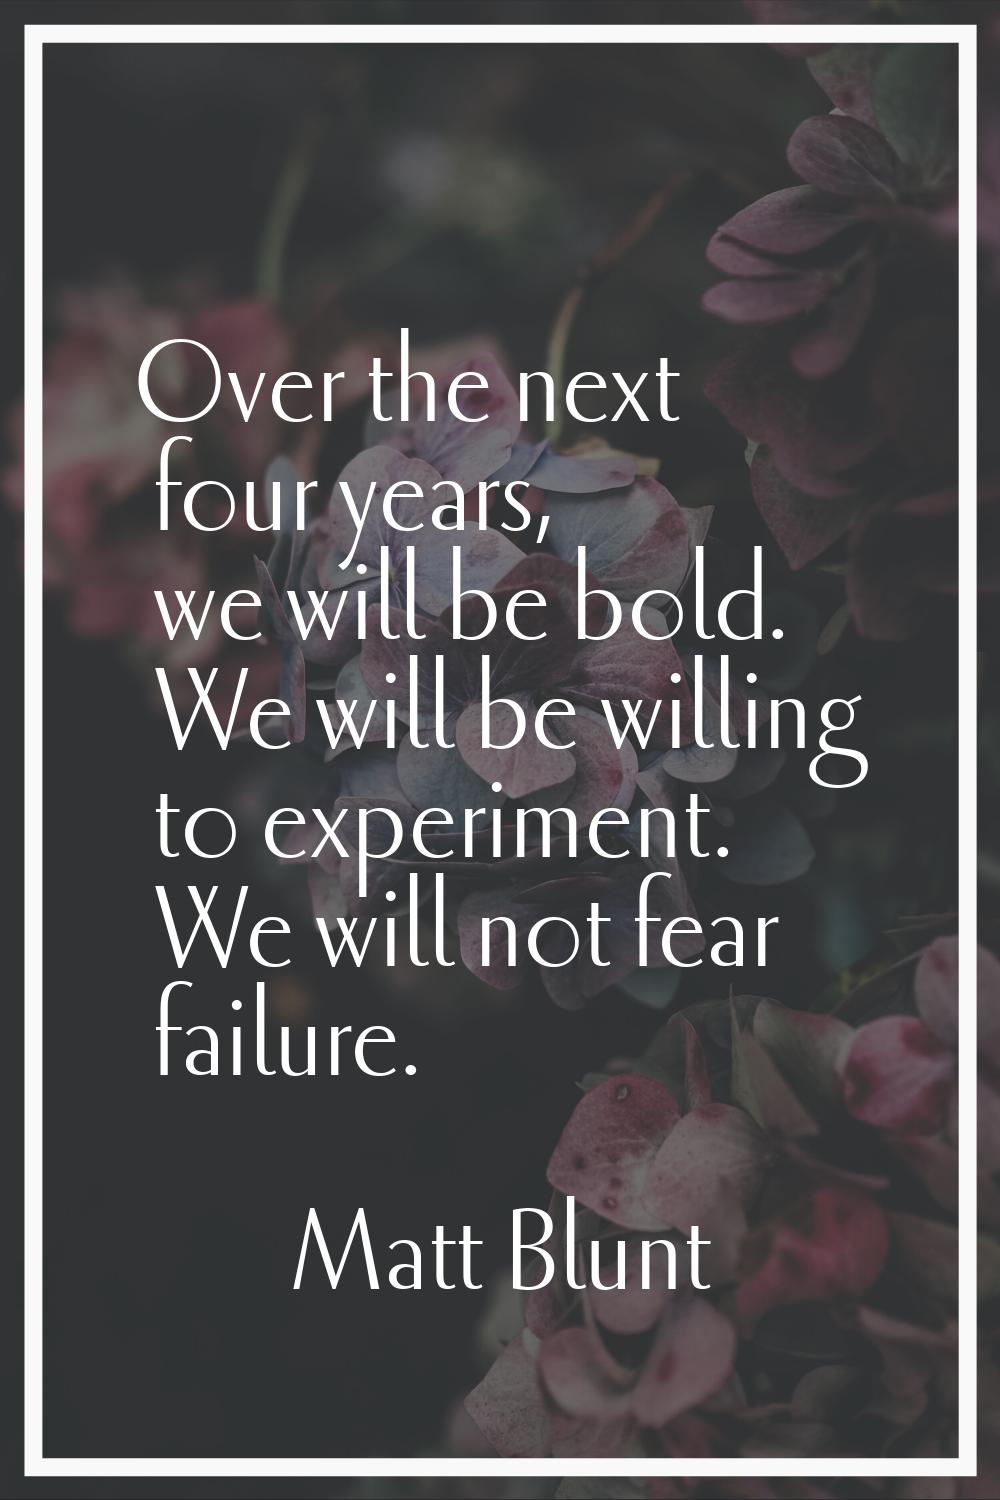 Over the next four years, we will be bold. We will be willing to experiment. We will not fear failu